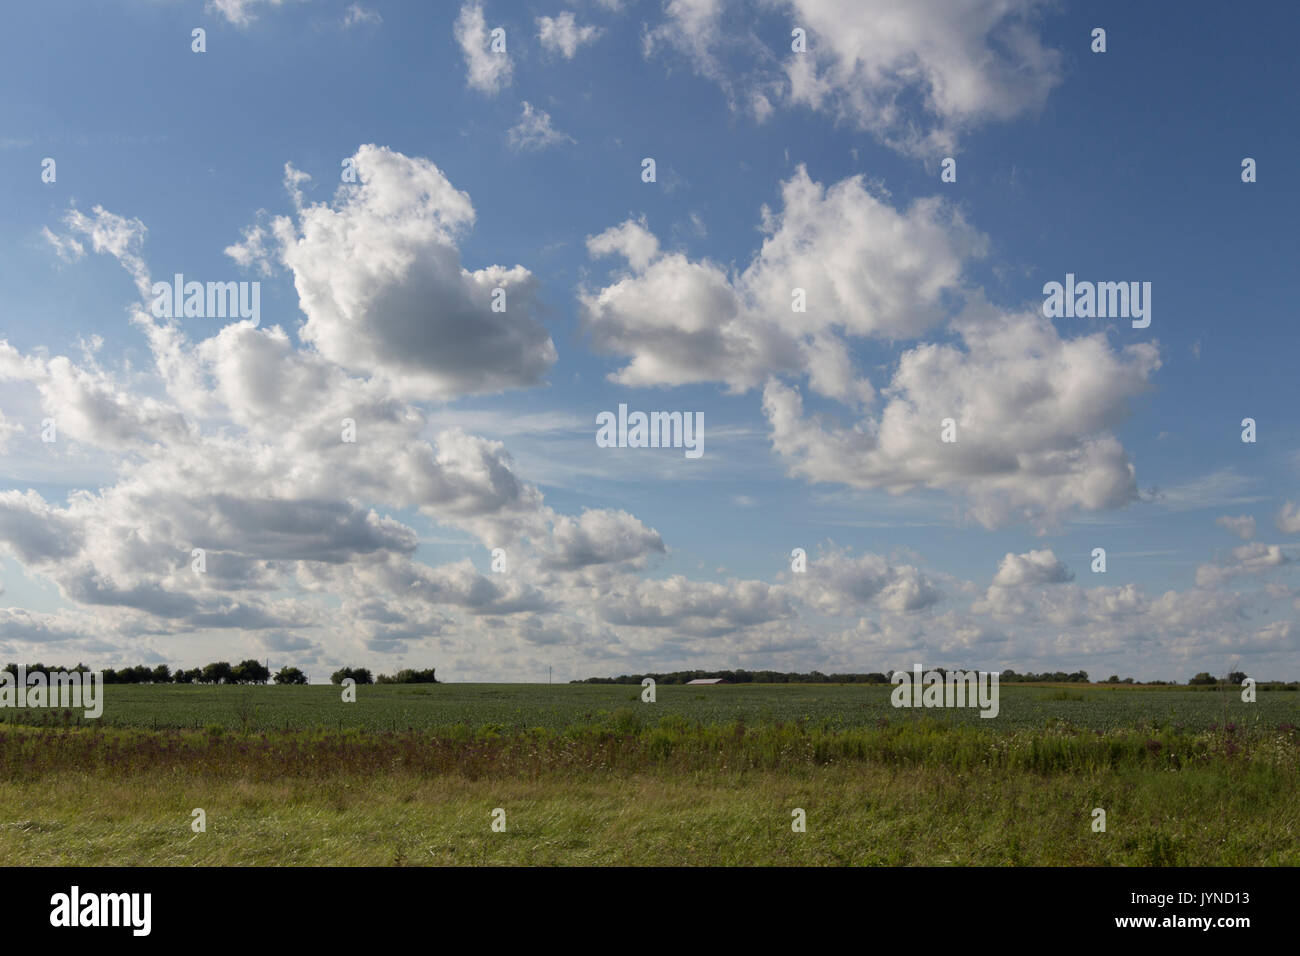 White puffy clouds on a beautiful day over a field. Stock Photo